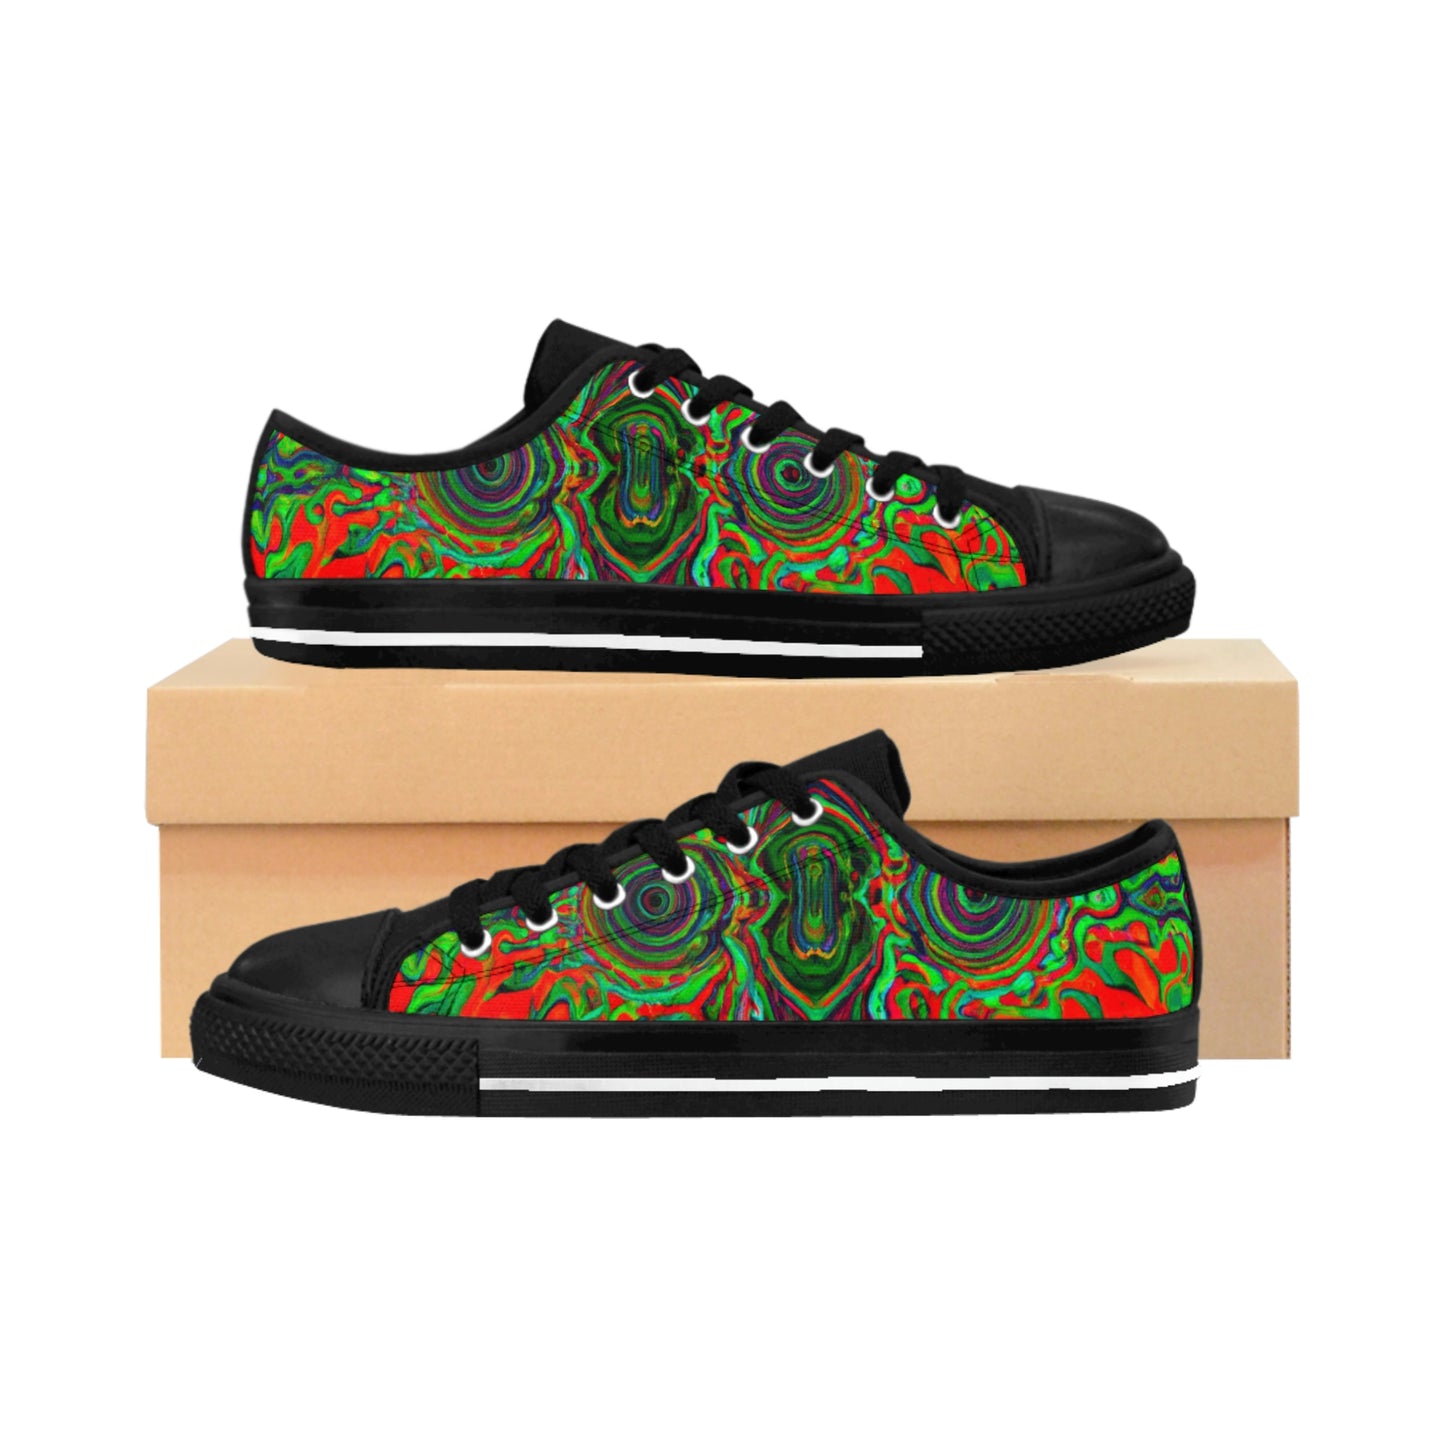 Wolfred the Shoemaker - Psychedelic Low Top